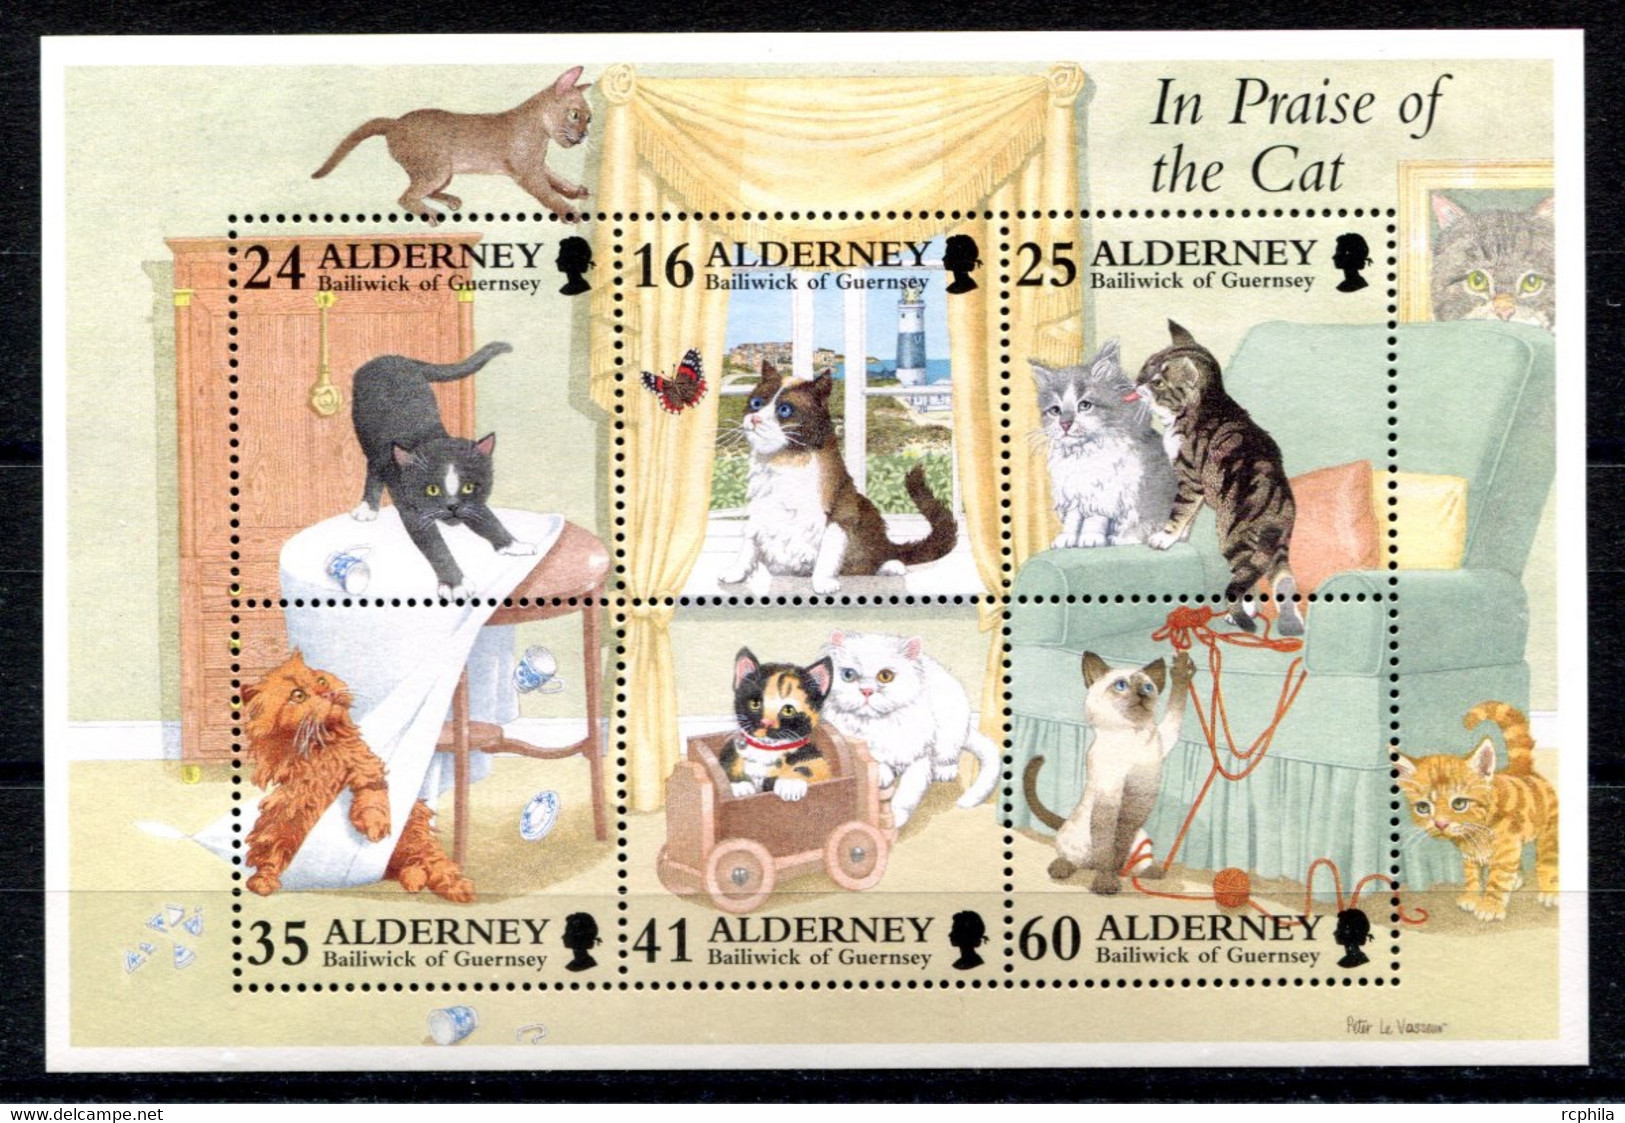 RC 22584 ALDERNEY COTE 11€ BF N° 2 CHATS CHATONS BLOC FEUILLET NEUF ** MNH TB - Alderney